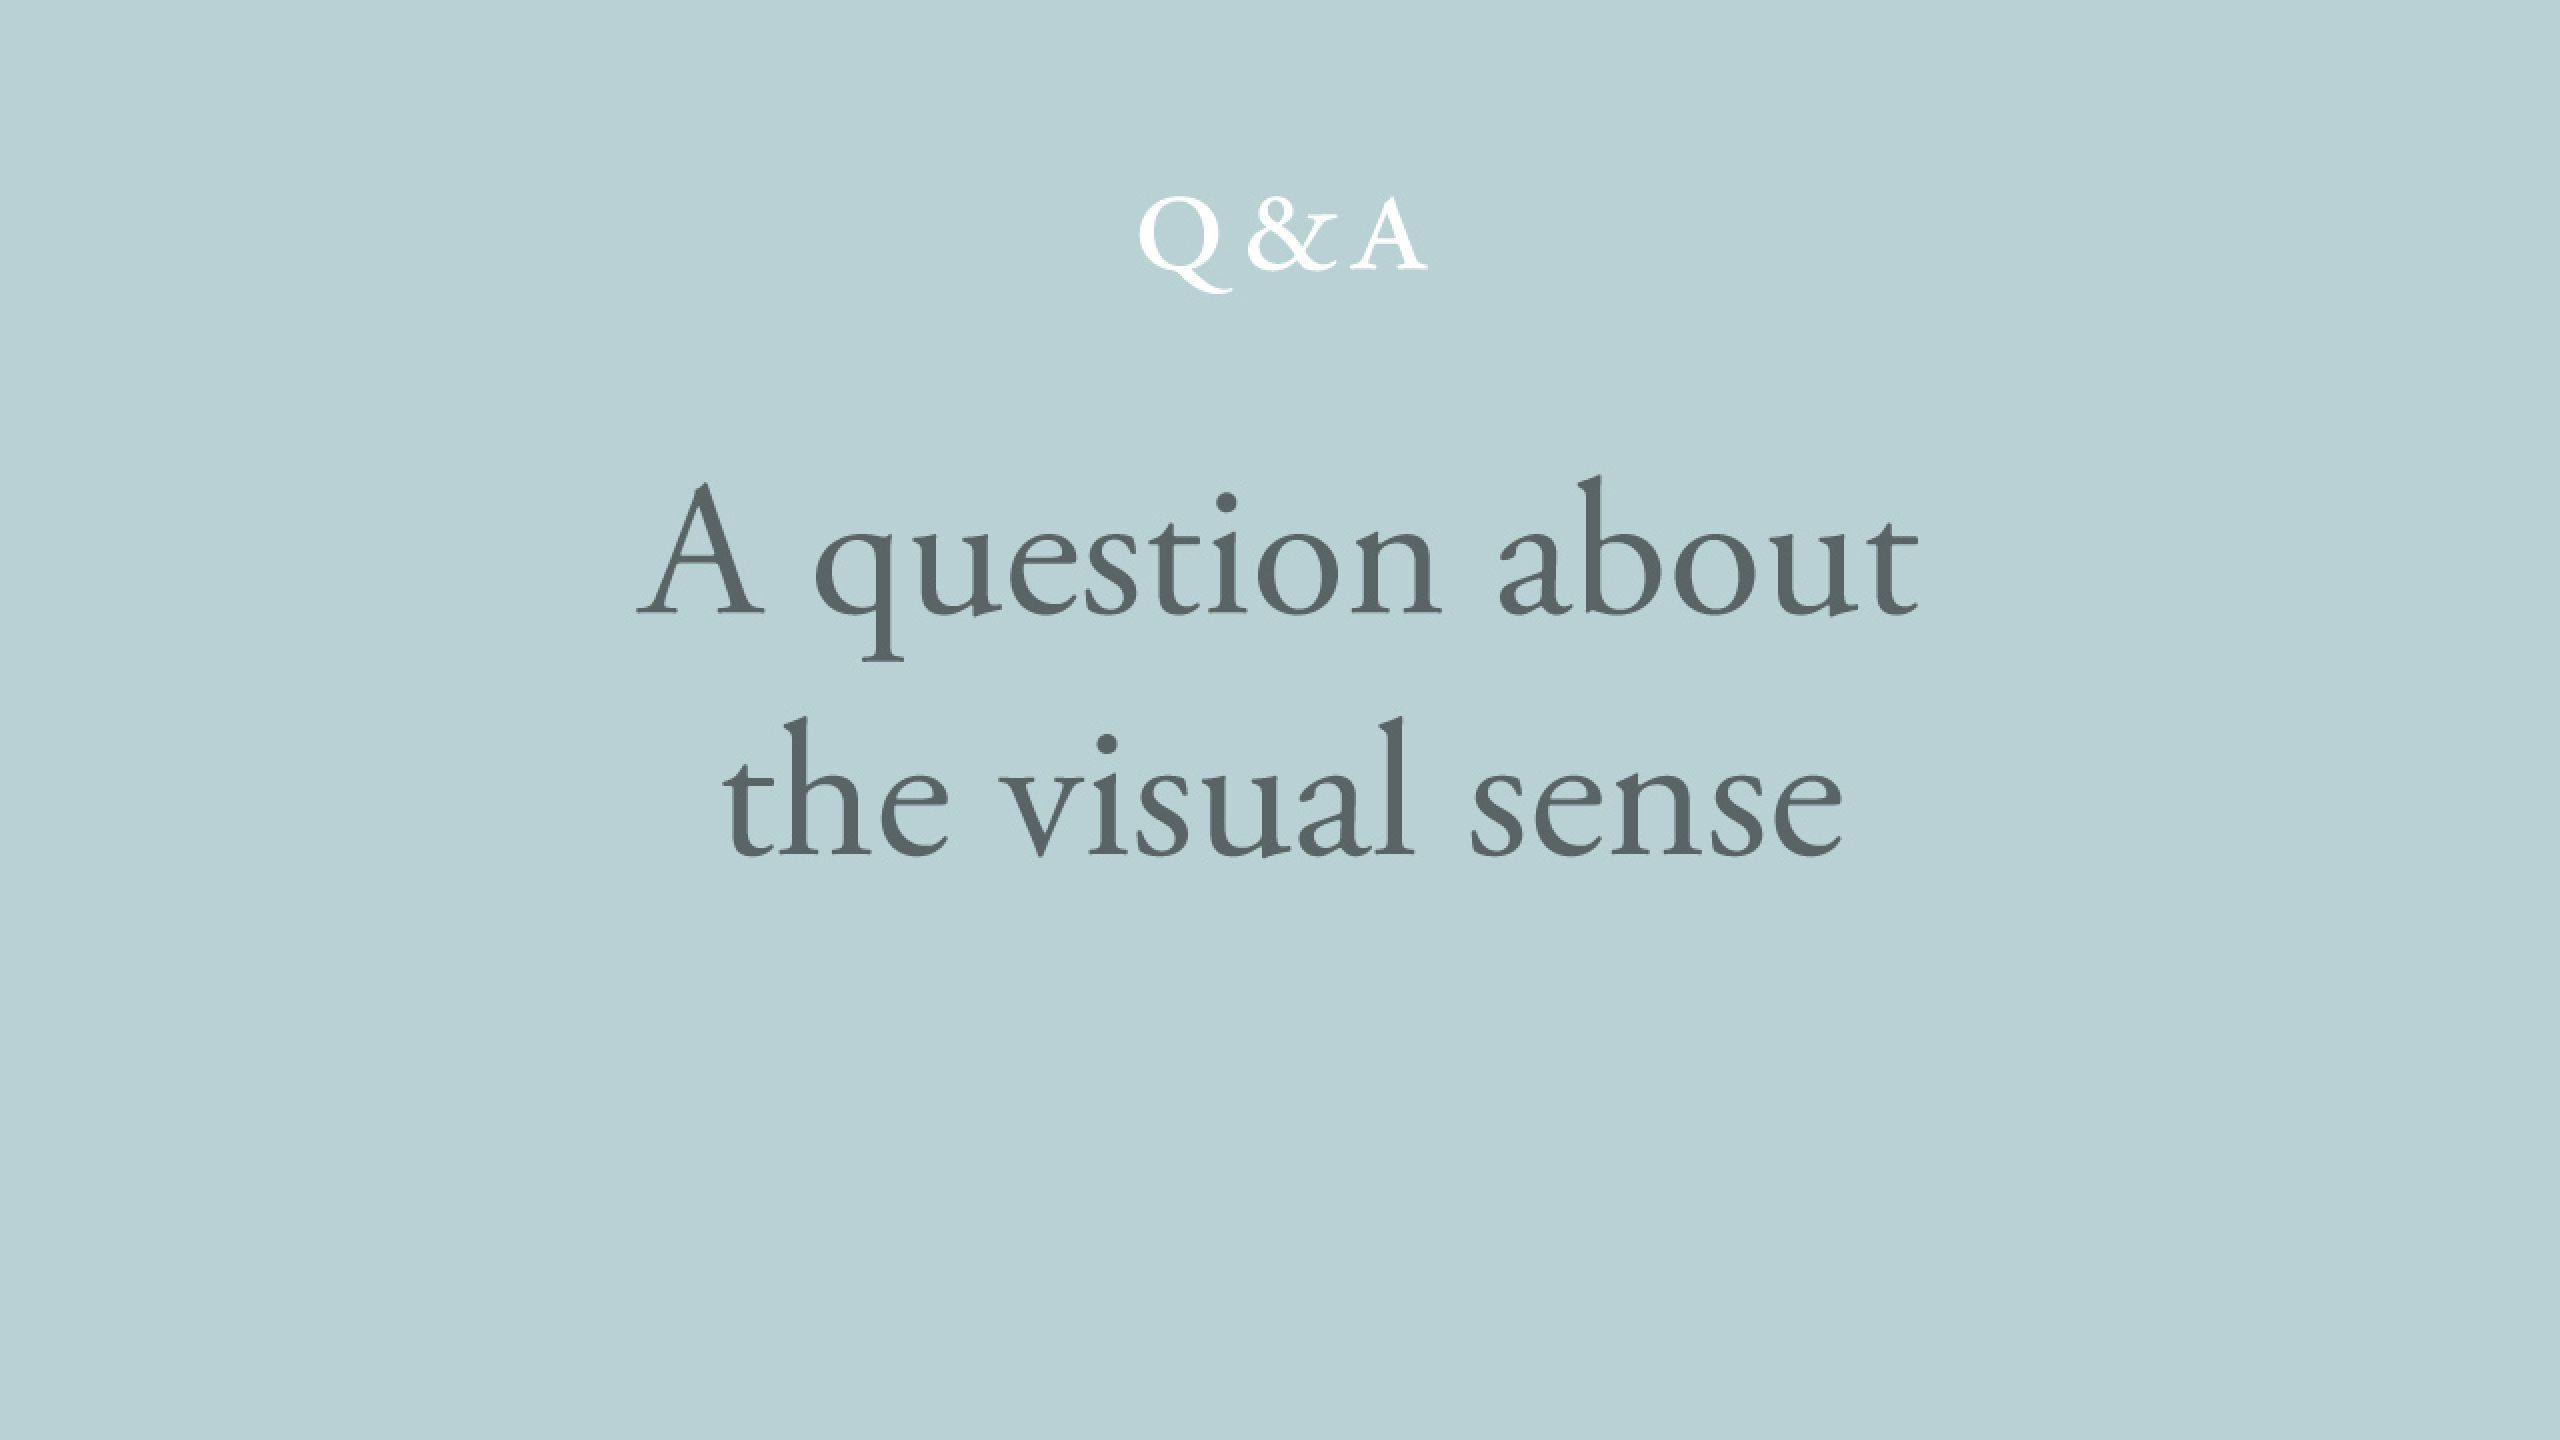 Why is the visual sense the most convincing to the mind?